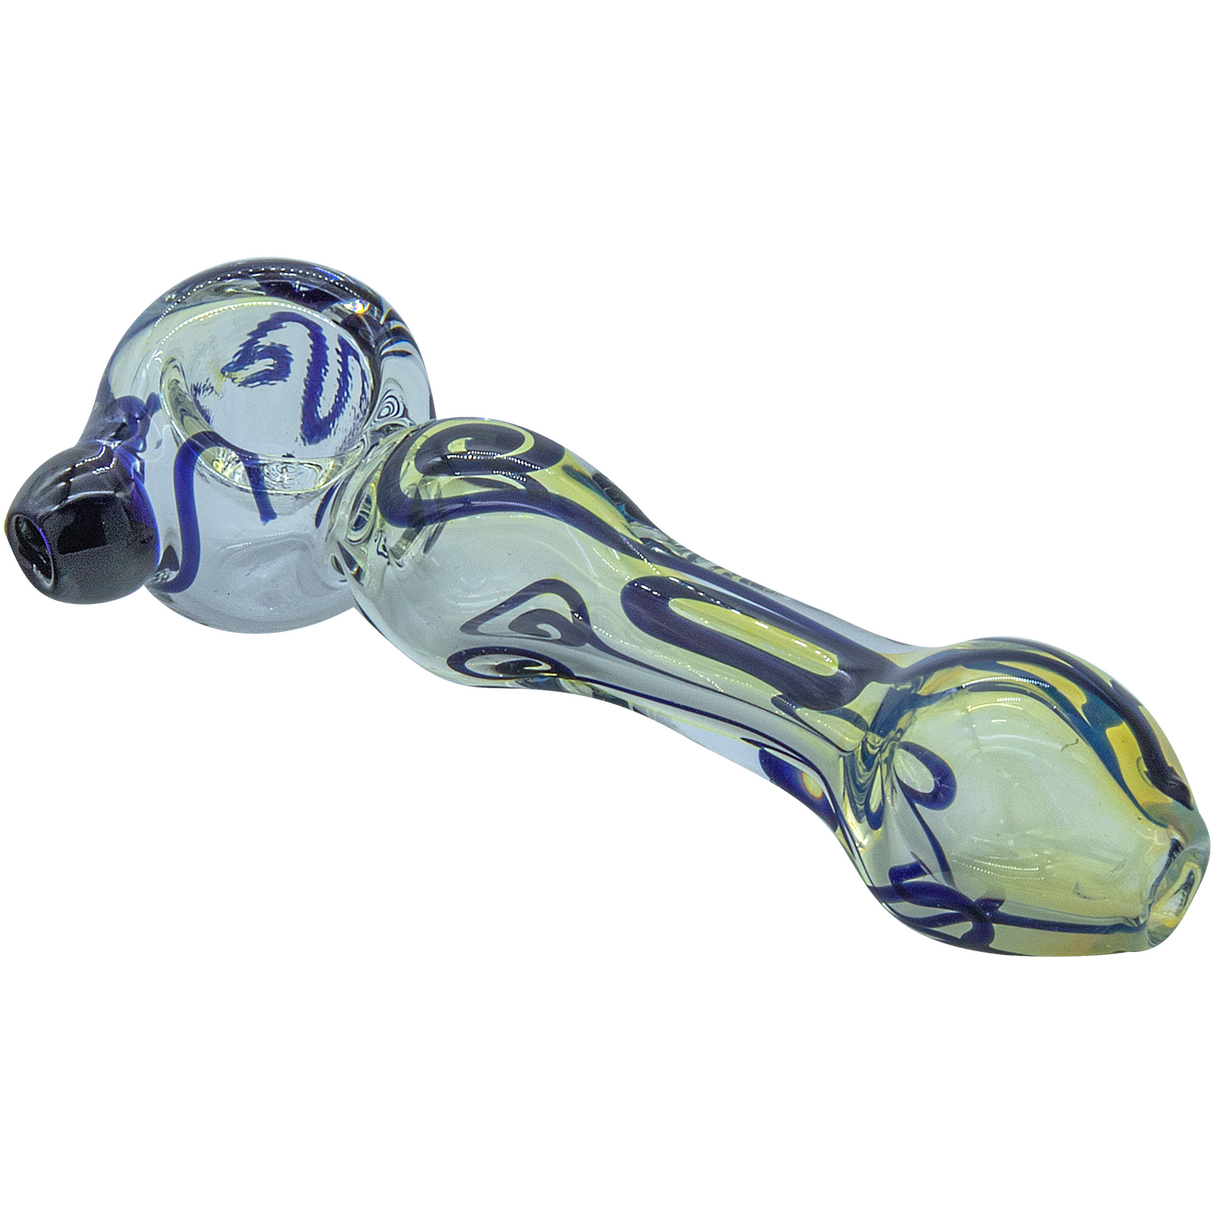 LA Pipes Painted Warrior Spoon Glass Pipe in Cobalt Blue, Fumed Color Changing, 3.25" Long